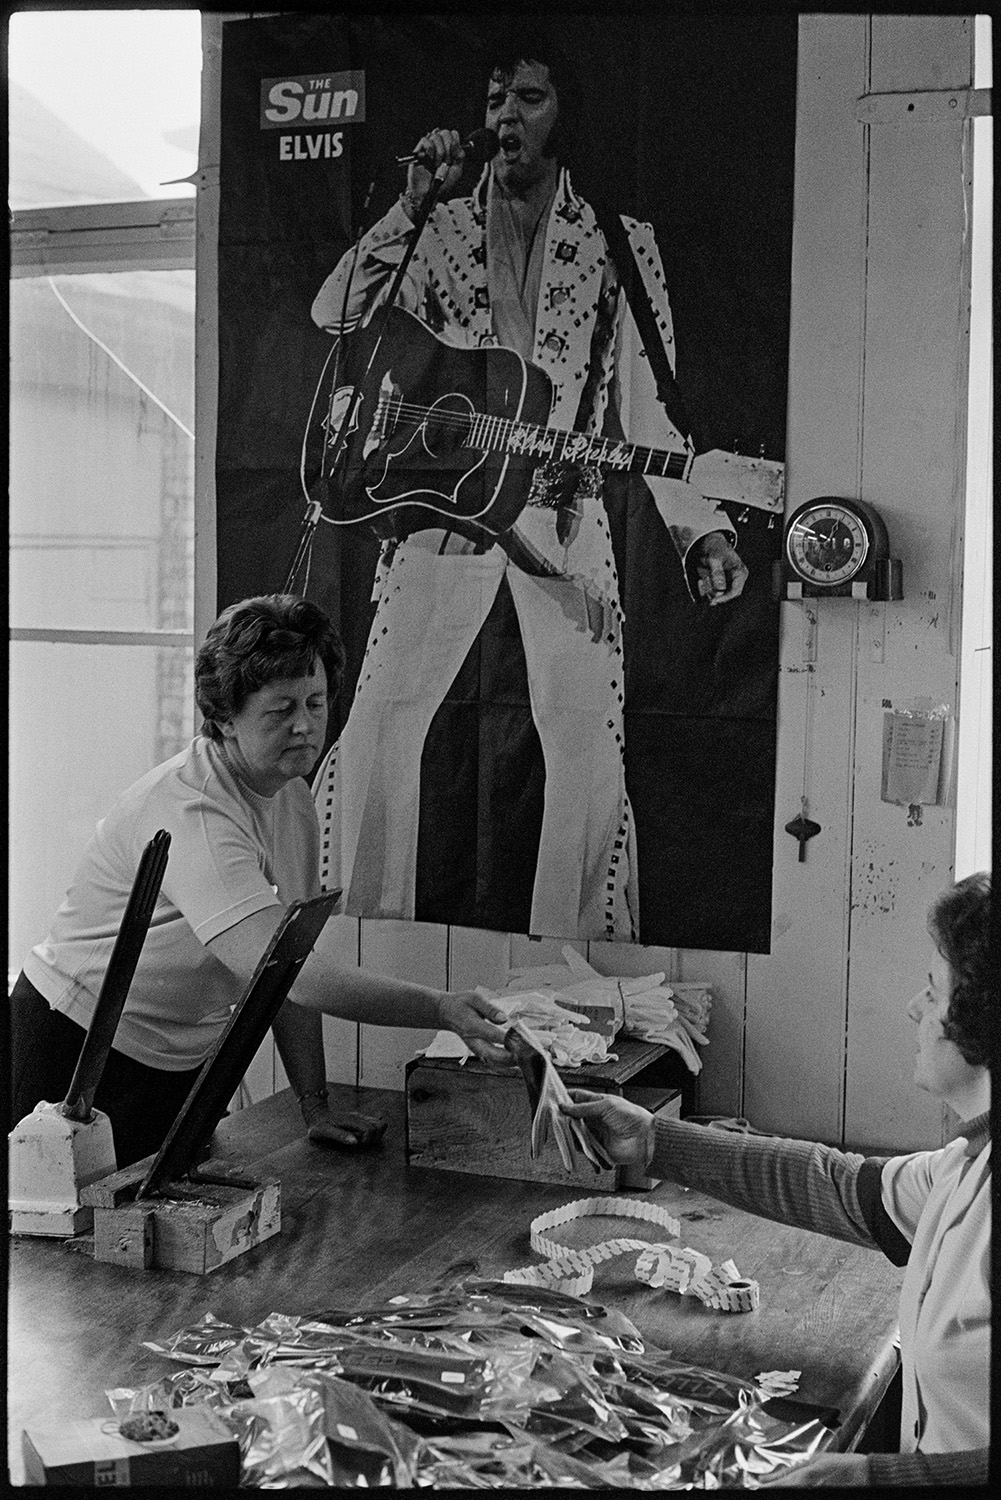 Workers in glove factory. Machinery. Pin-ups!
[Women working at Vaughans Glove Factory, Halsdon Terrace, Torrington by a big poster of Elvis on the wall.]